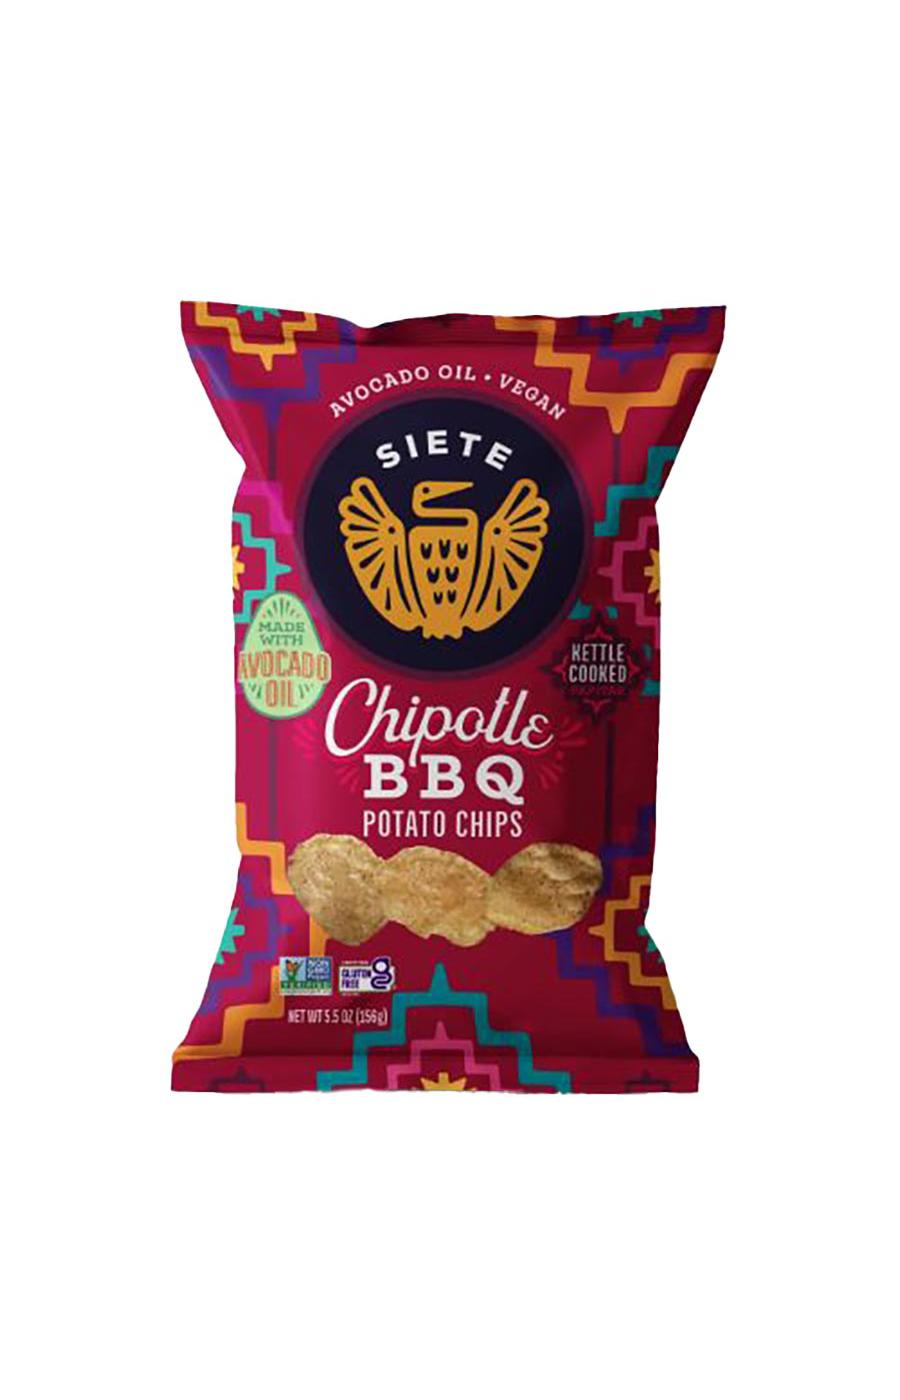 Siete Chipotle BBQ Kettle Cooked Potato Chips; image 1 of 2